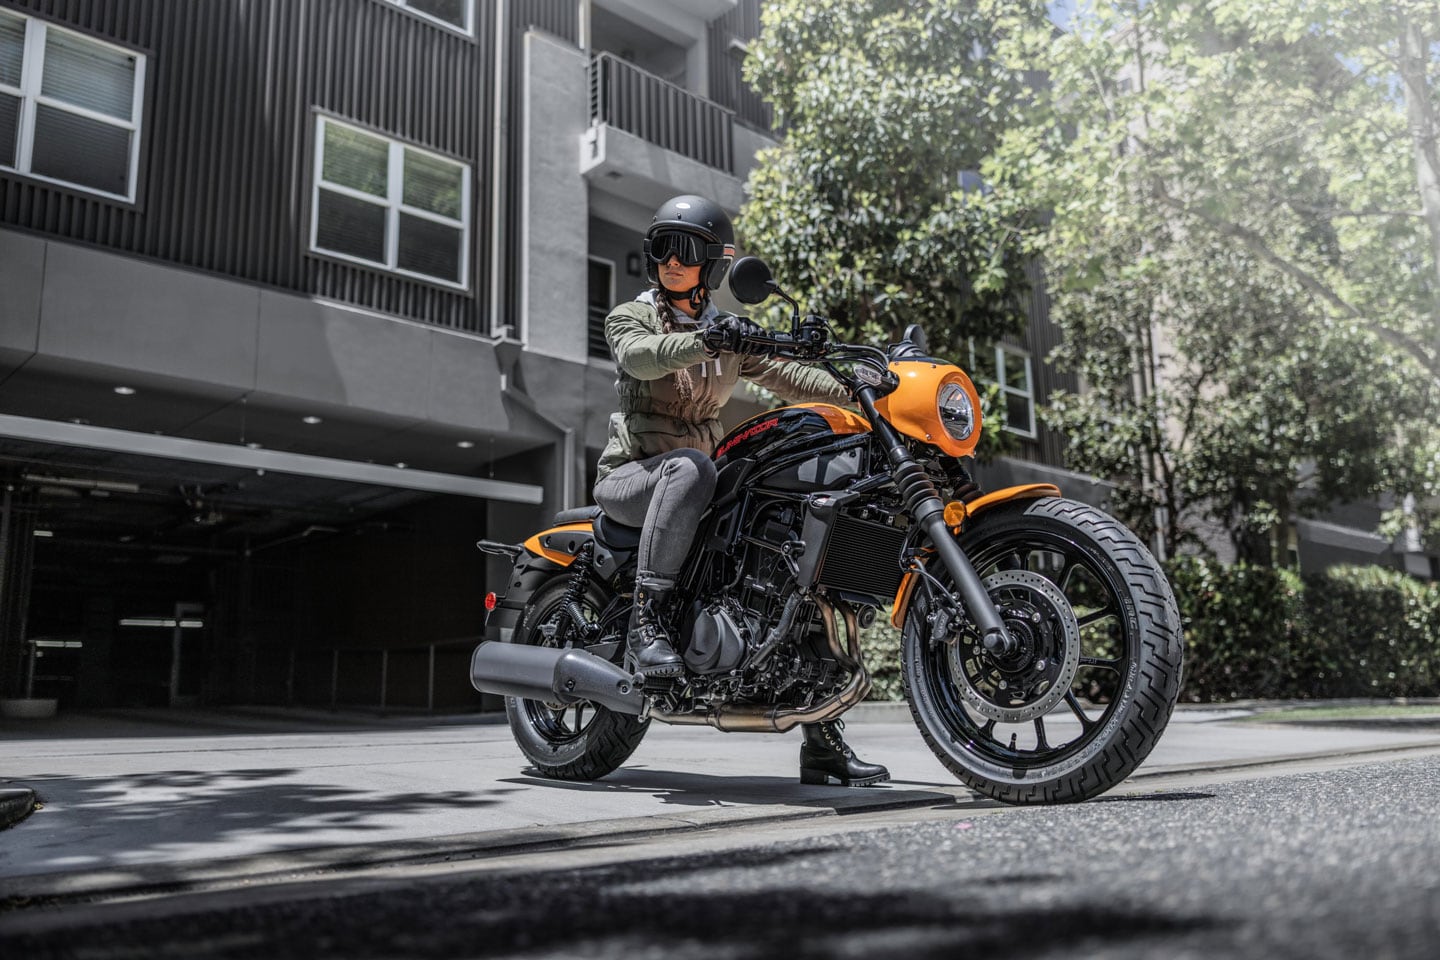 Kawasaki offers the Eliminator in an upscale SE model. Additional features include an exclusive color, a two-pattern seat, headlight cowl, fork boots, ABS, and a waterproof USB-C outlet.